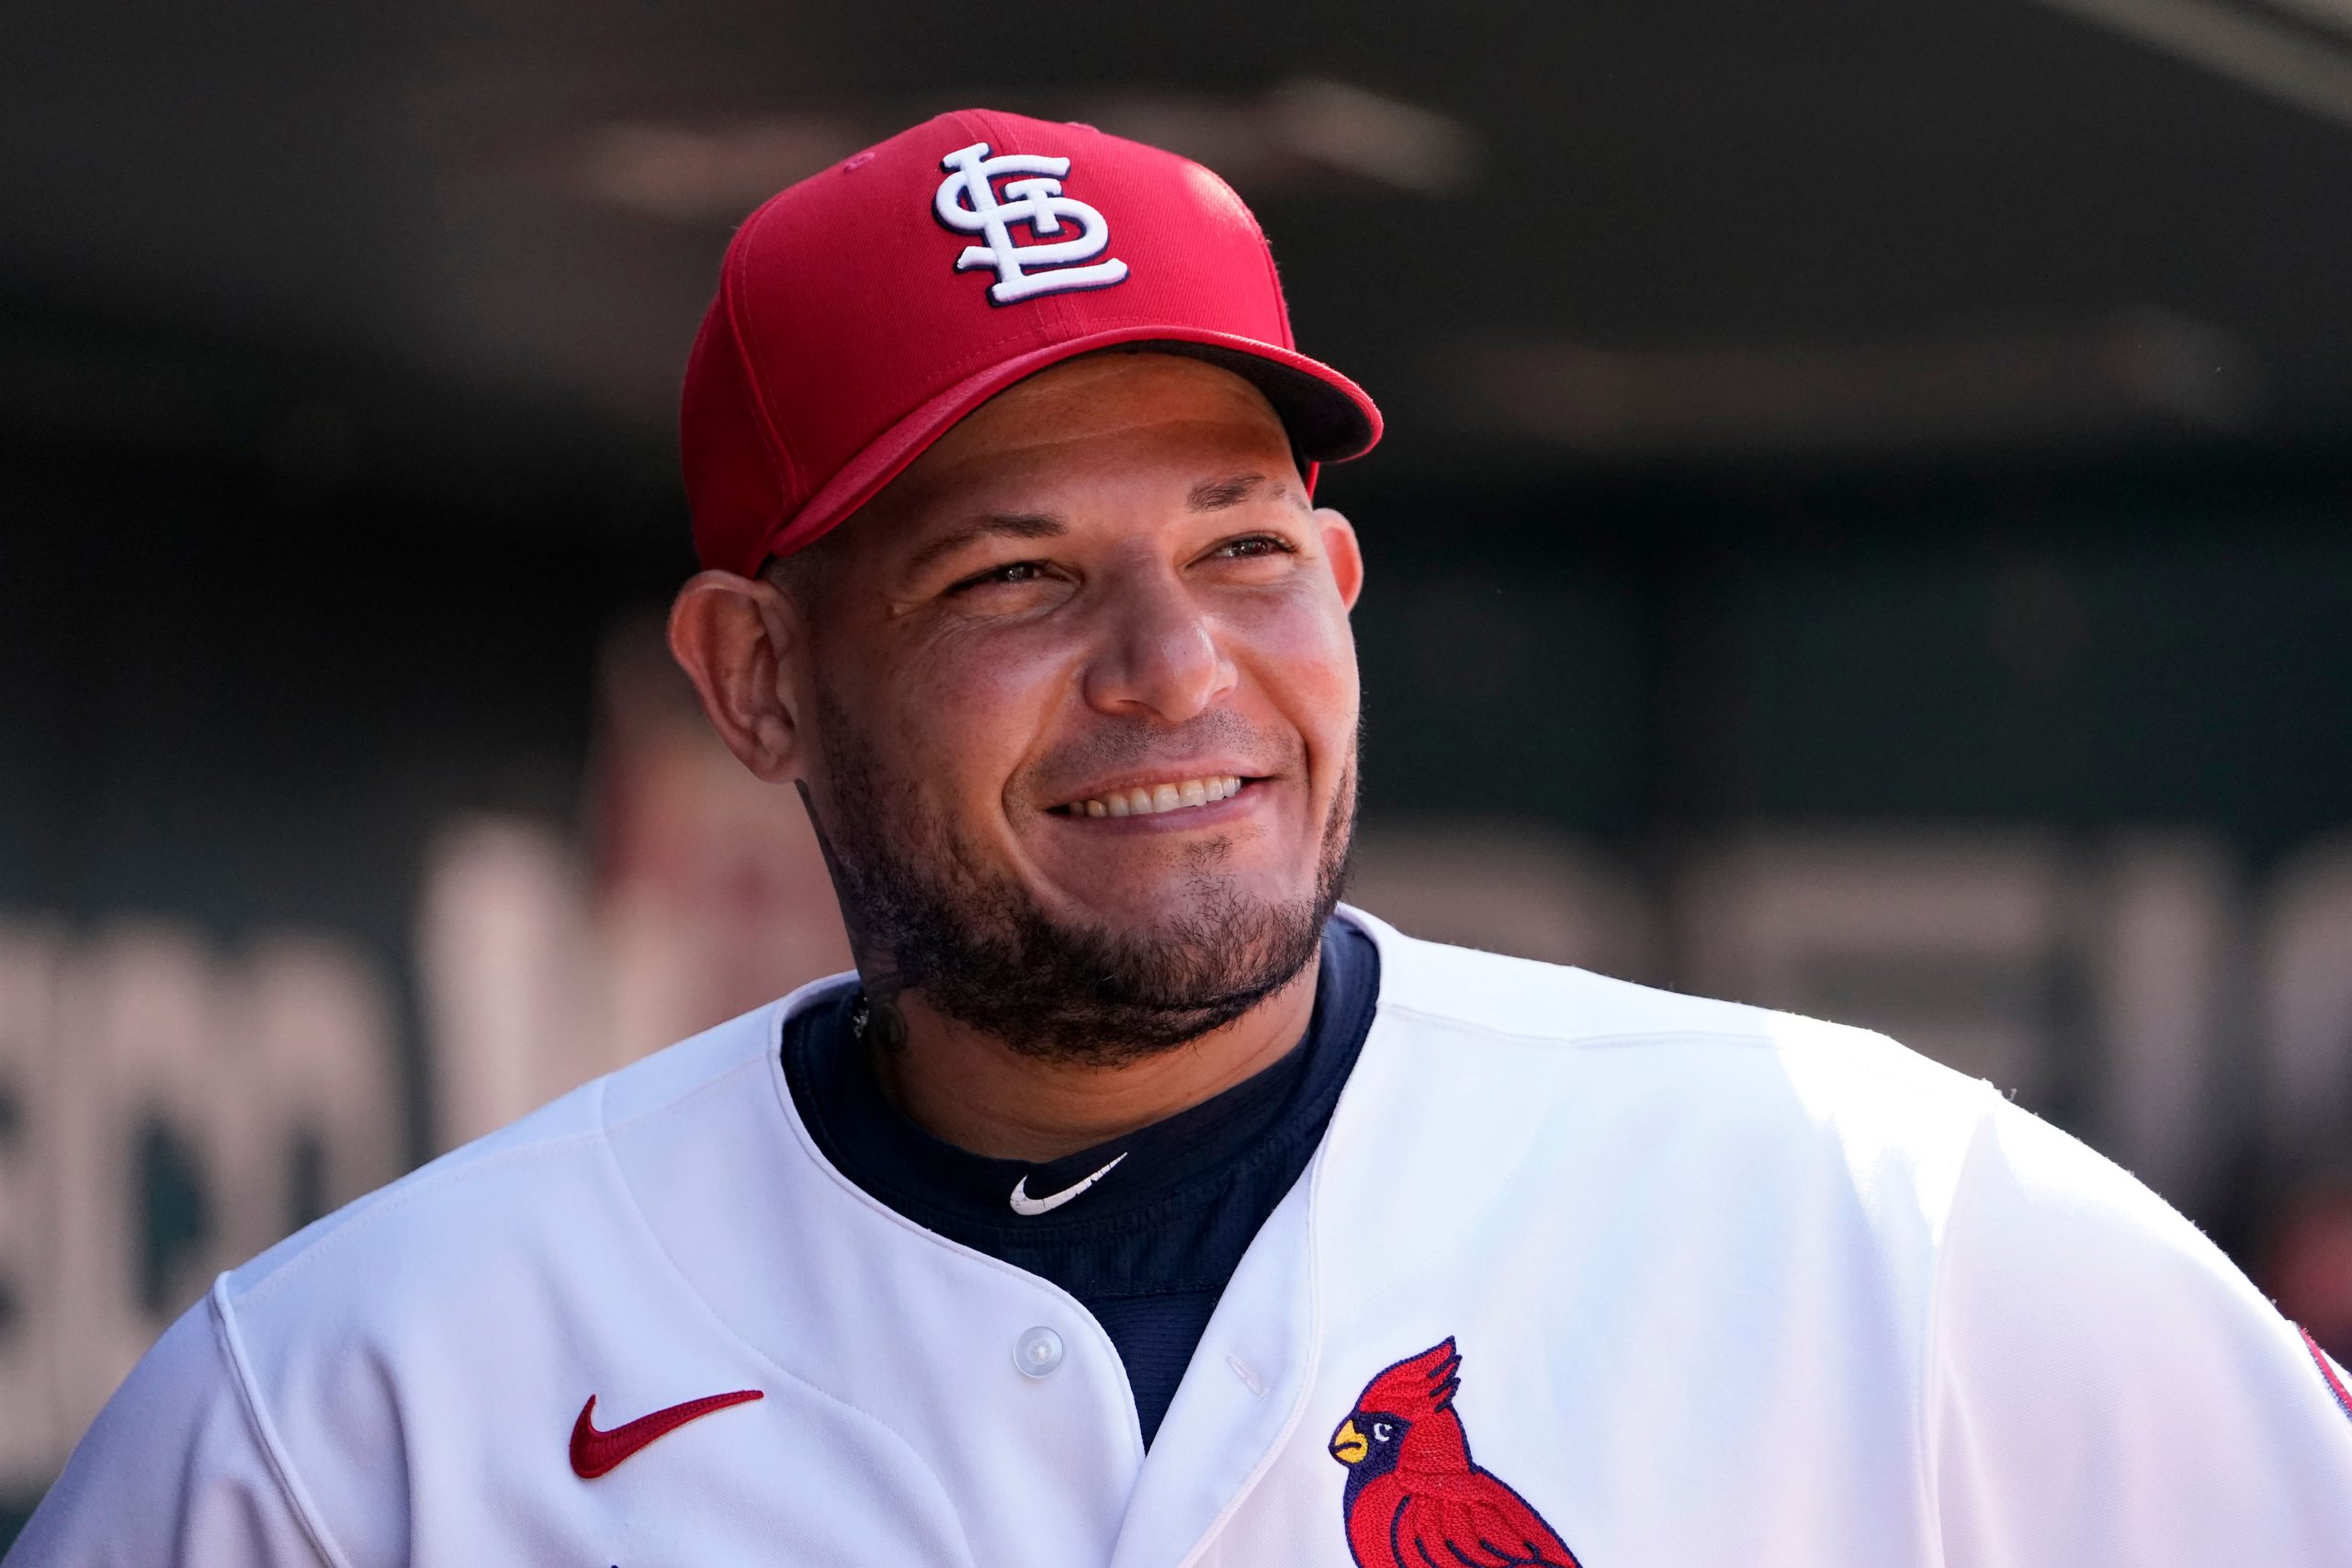 MLB Yadier Molina to retire next year, agrees to 10 million deal with